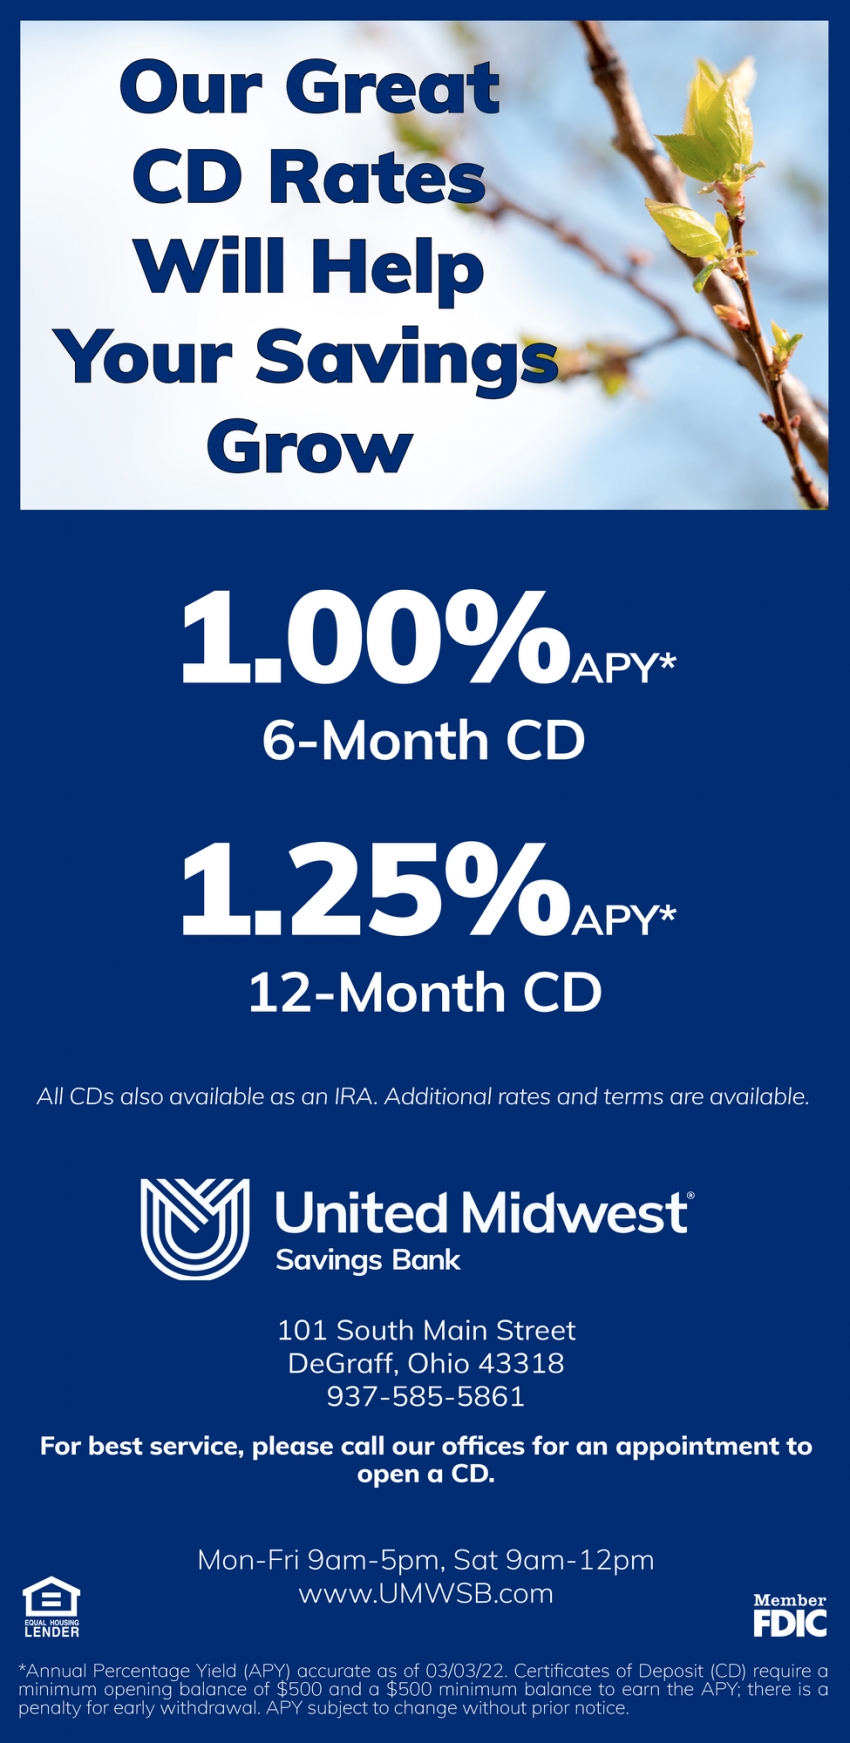 Our Great CD Rates Will Help Your Savings Grow